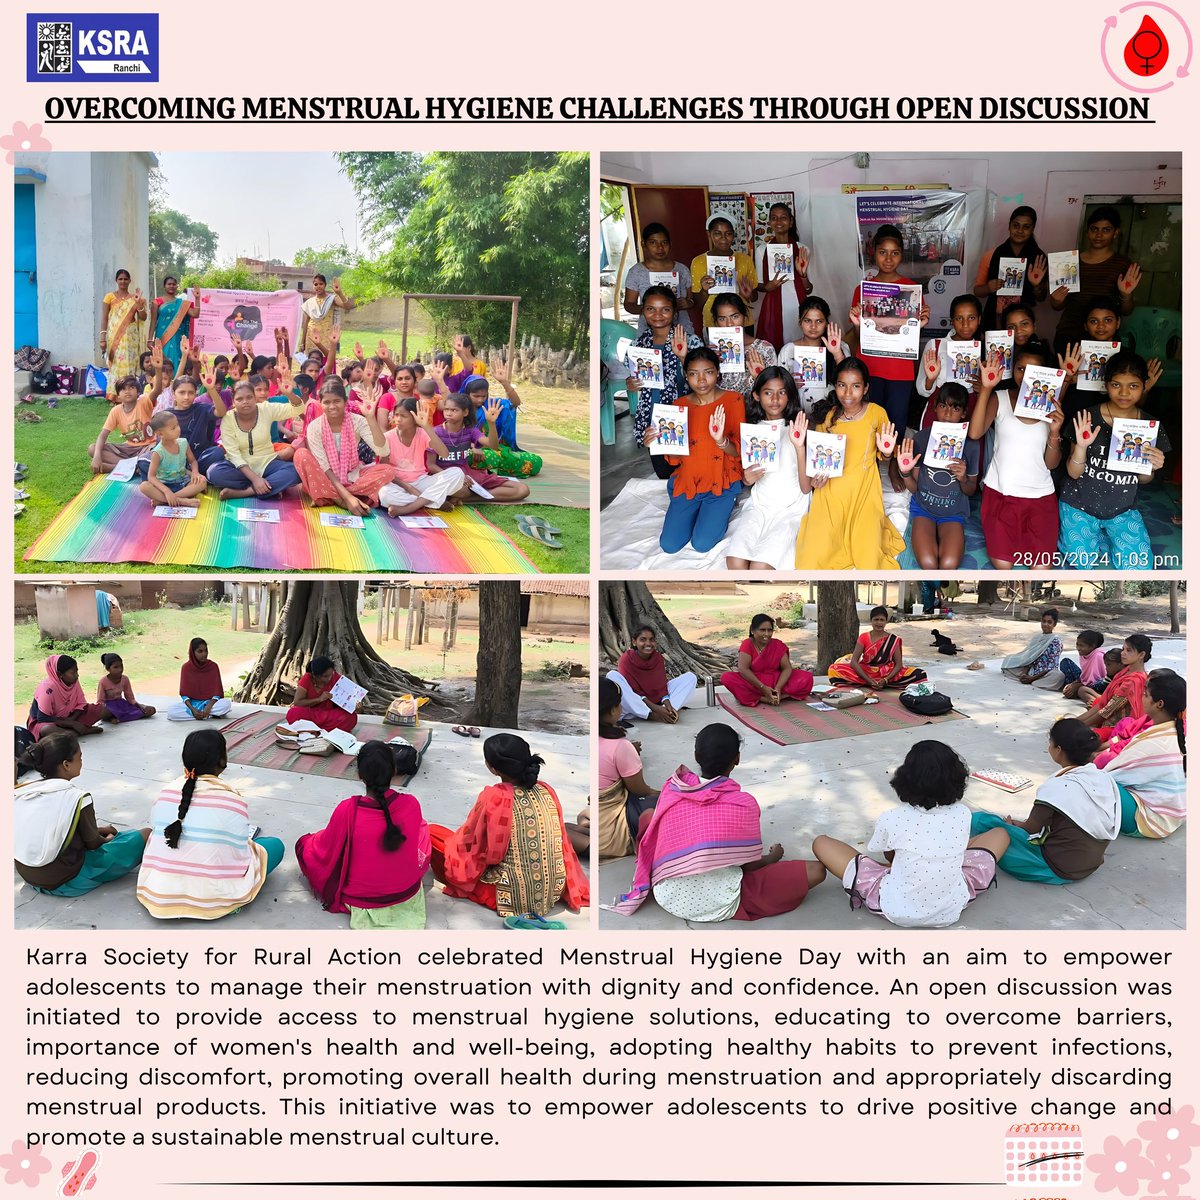 Glimpses of #orientation activities #MenstrualHygieneDay(28 may) conducted @Lapung block @Karra Block & @Ranchi urban area of #Jharkhand to raise #publicawareness on significance of #menstrualhealth
Together for a #PeriodFriendlyWorld
Thanks @wethechangeind 
@HLTH_JHARKHAND
#SDG3